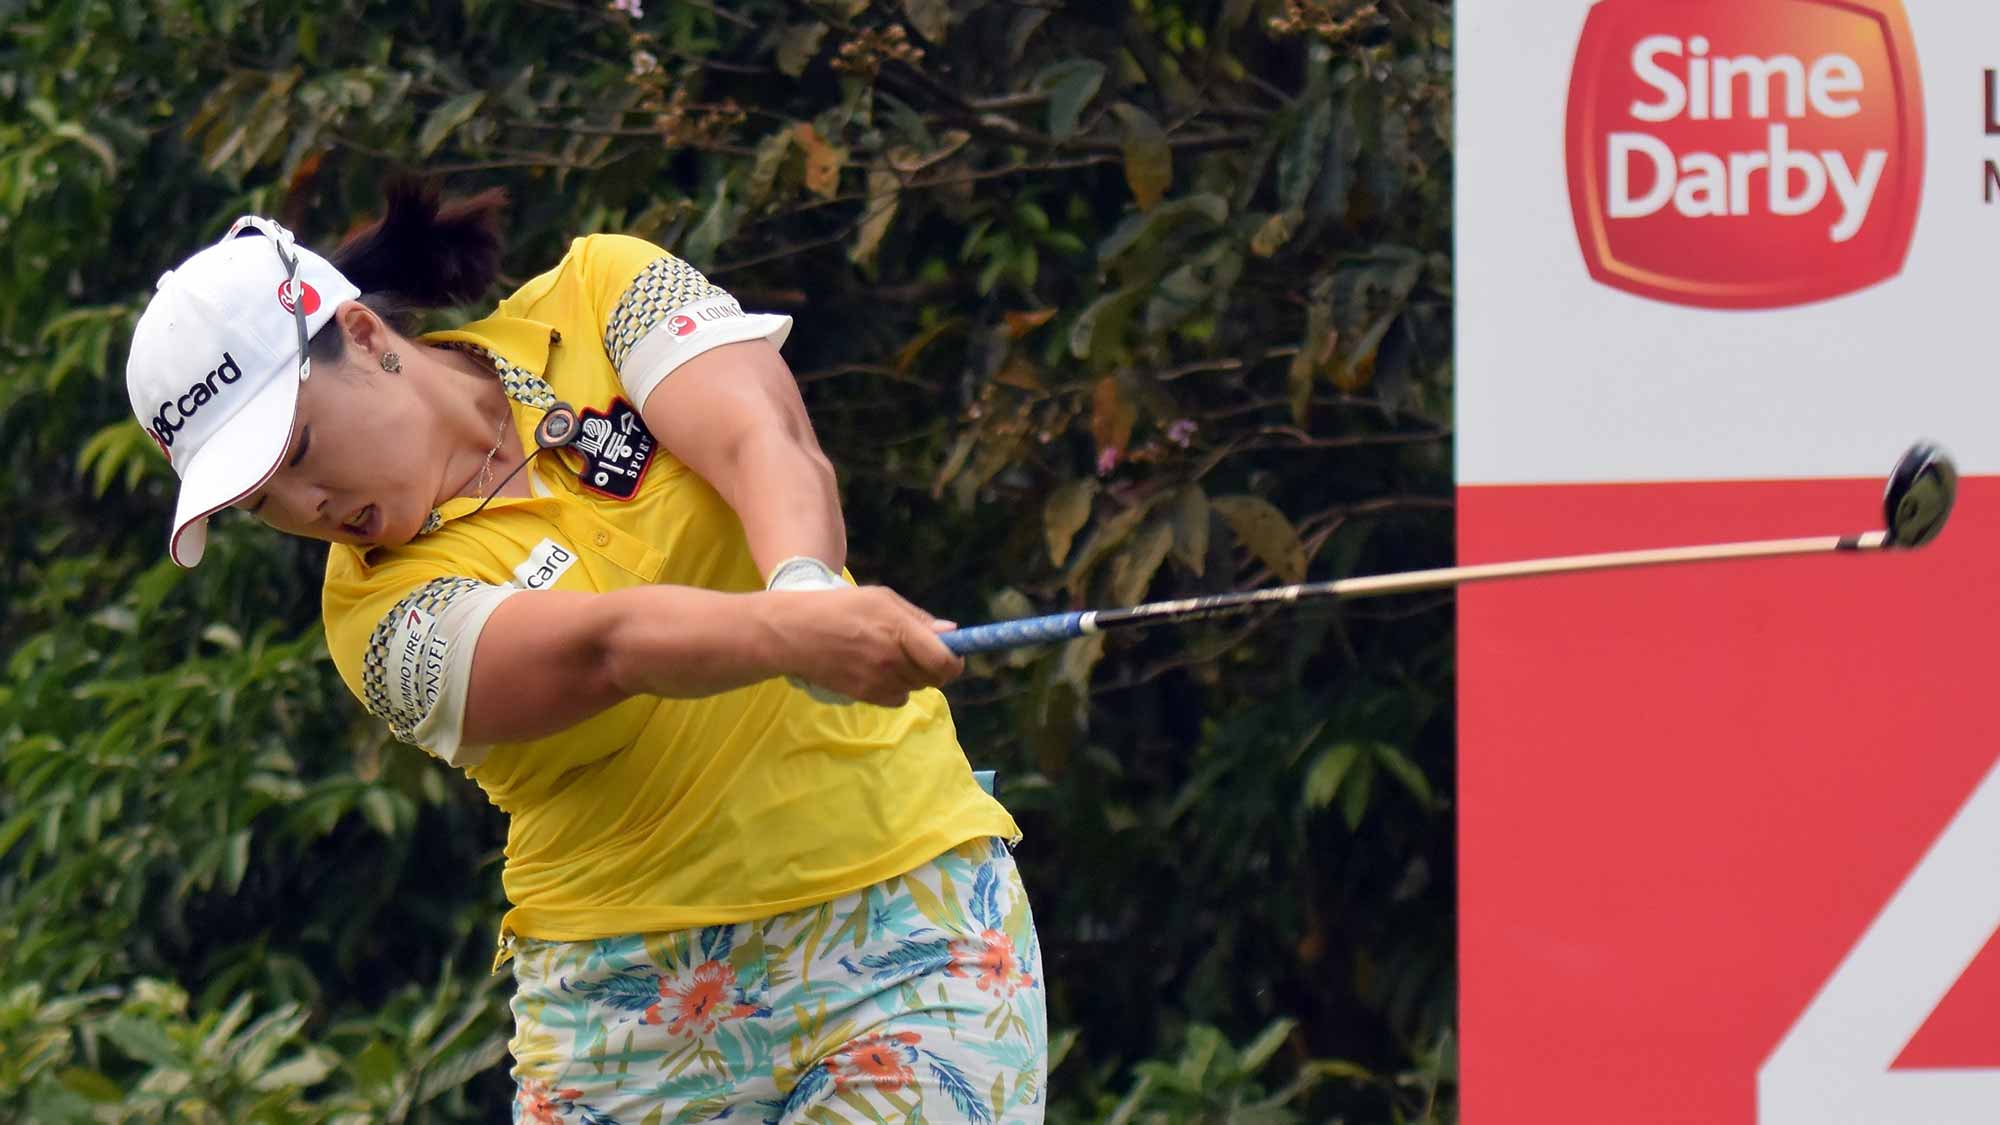 Na Ha Jang of South Korea plays on the 4th hole during the final round of the Sime Darby LPGA Tour at Kuala Lumpur Golf & Country Club